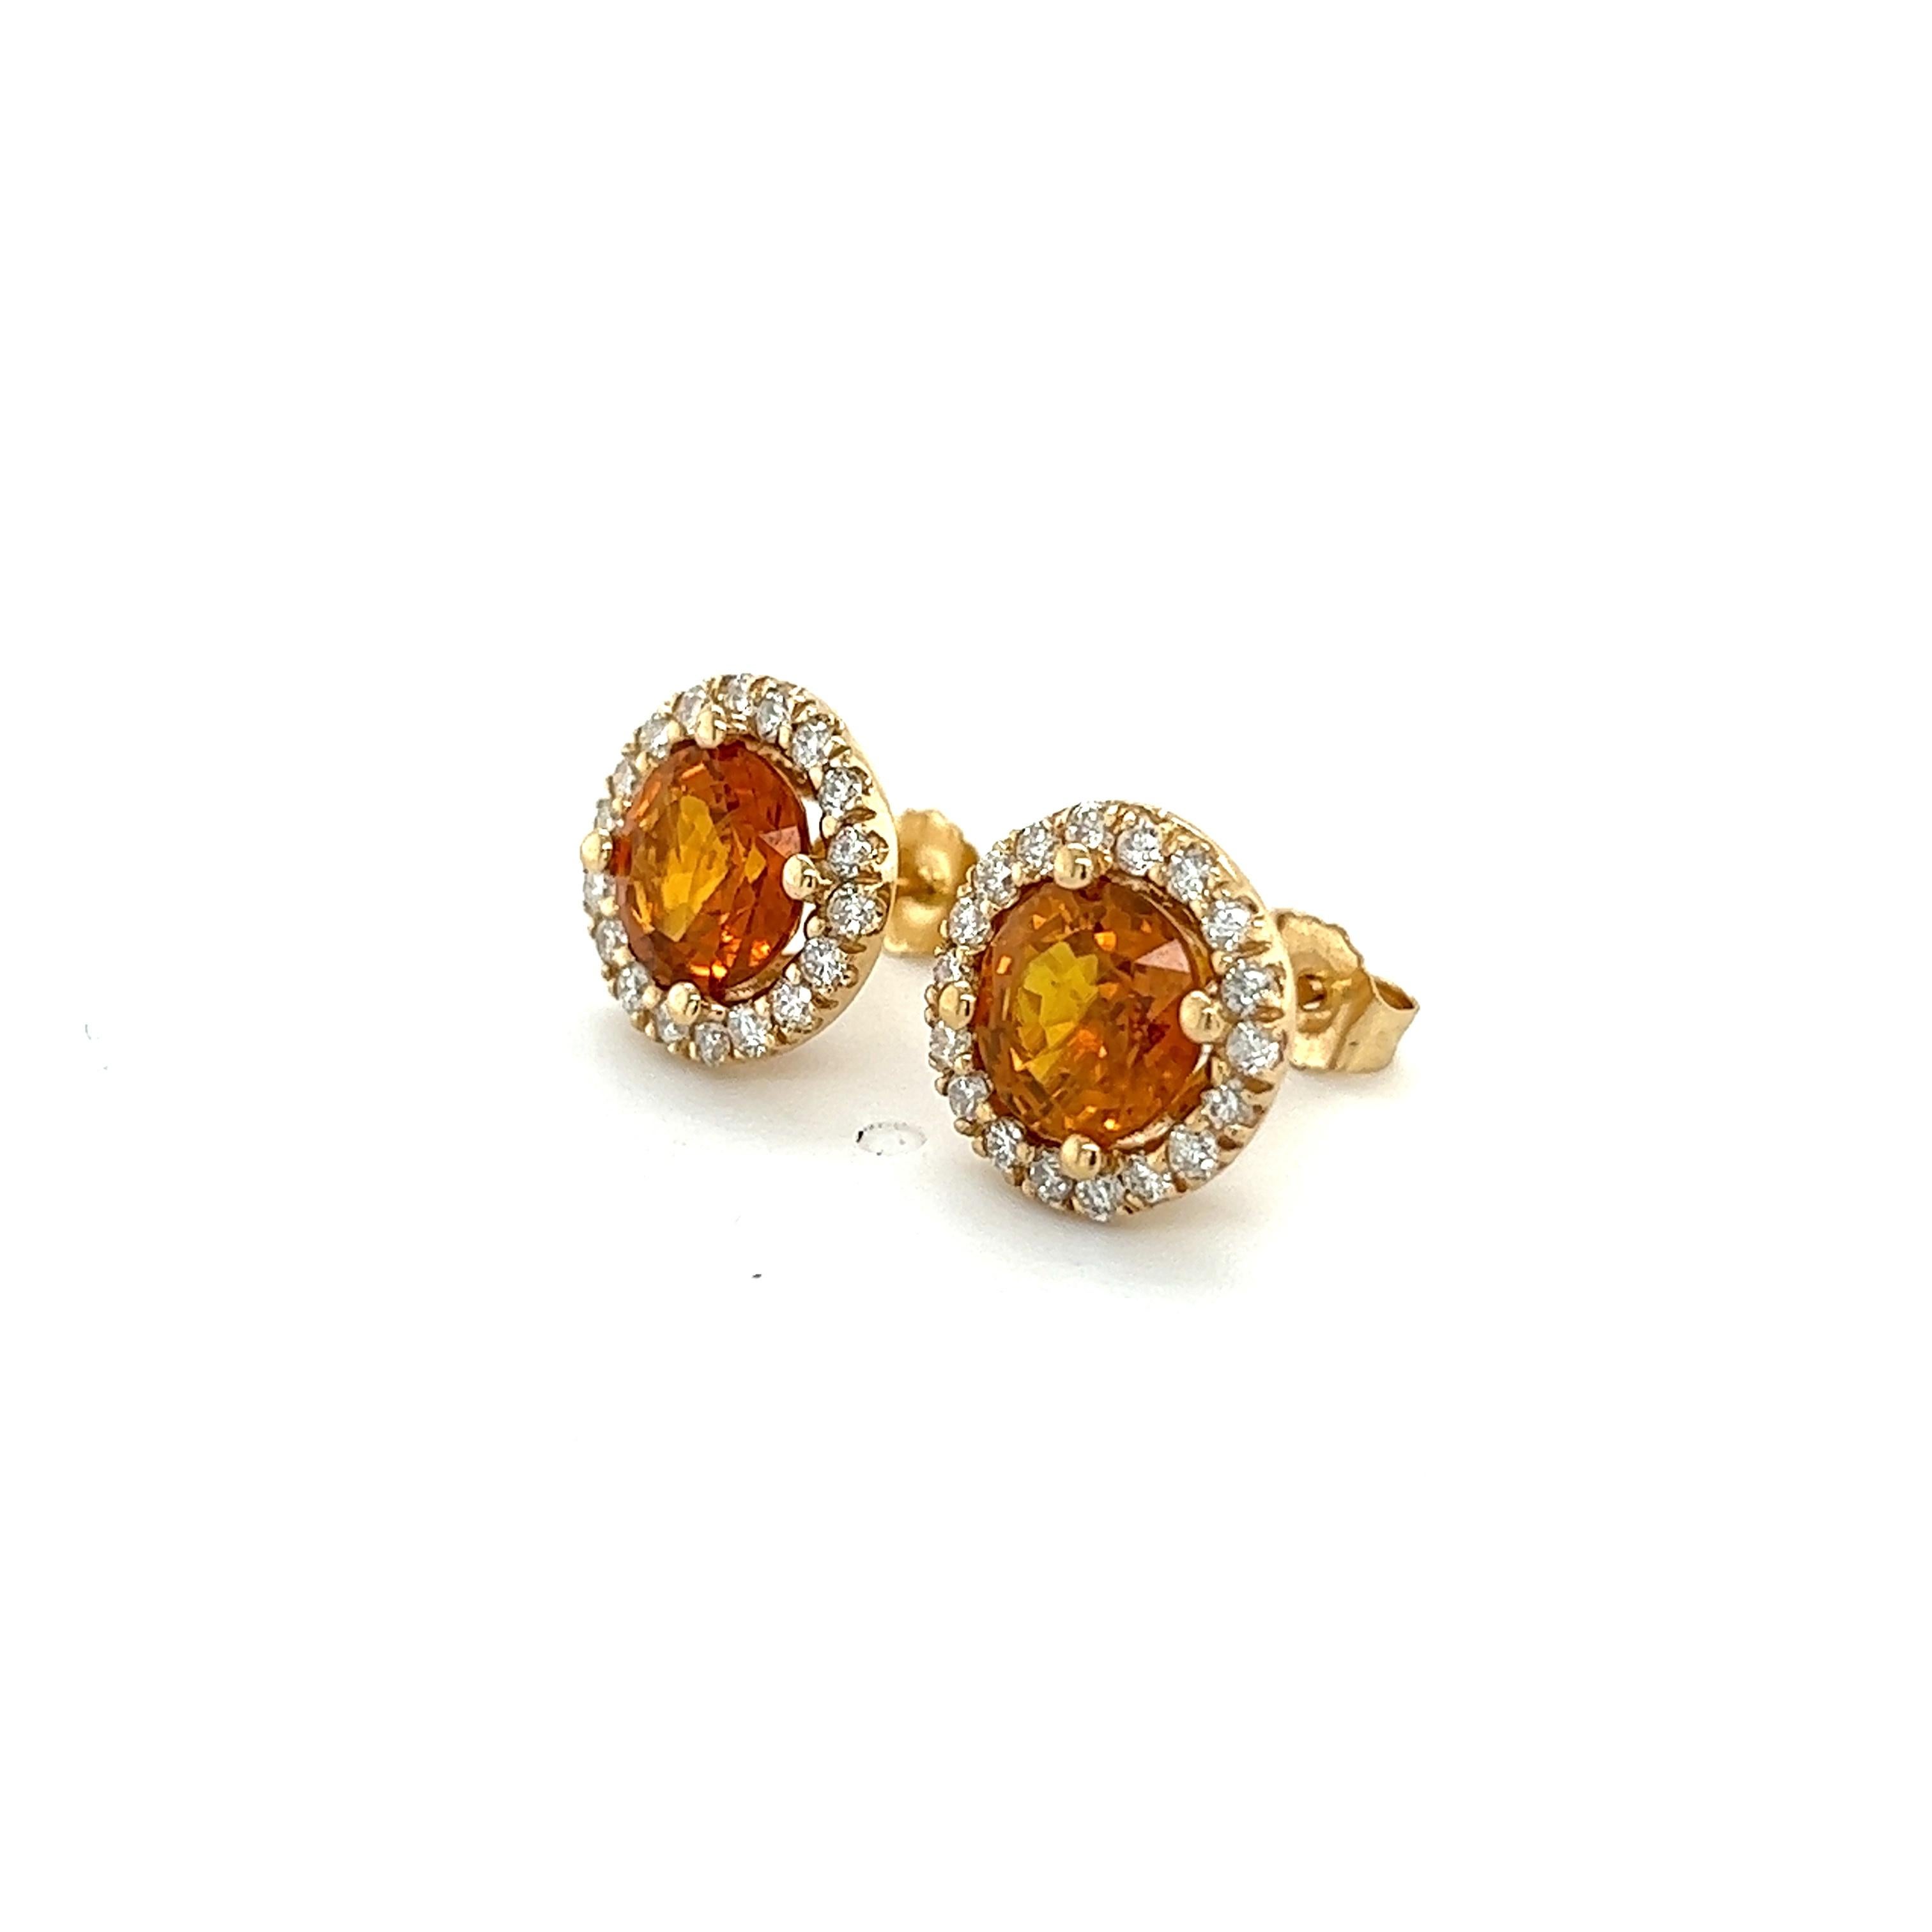 Natural Orange Sapphire Diamond Stud Earrings 14k WG 3.54 TCW Certified In New Condition For Sale In Brooklyn, NY